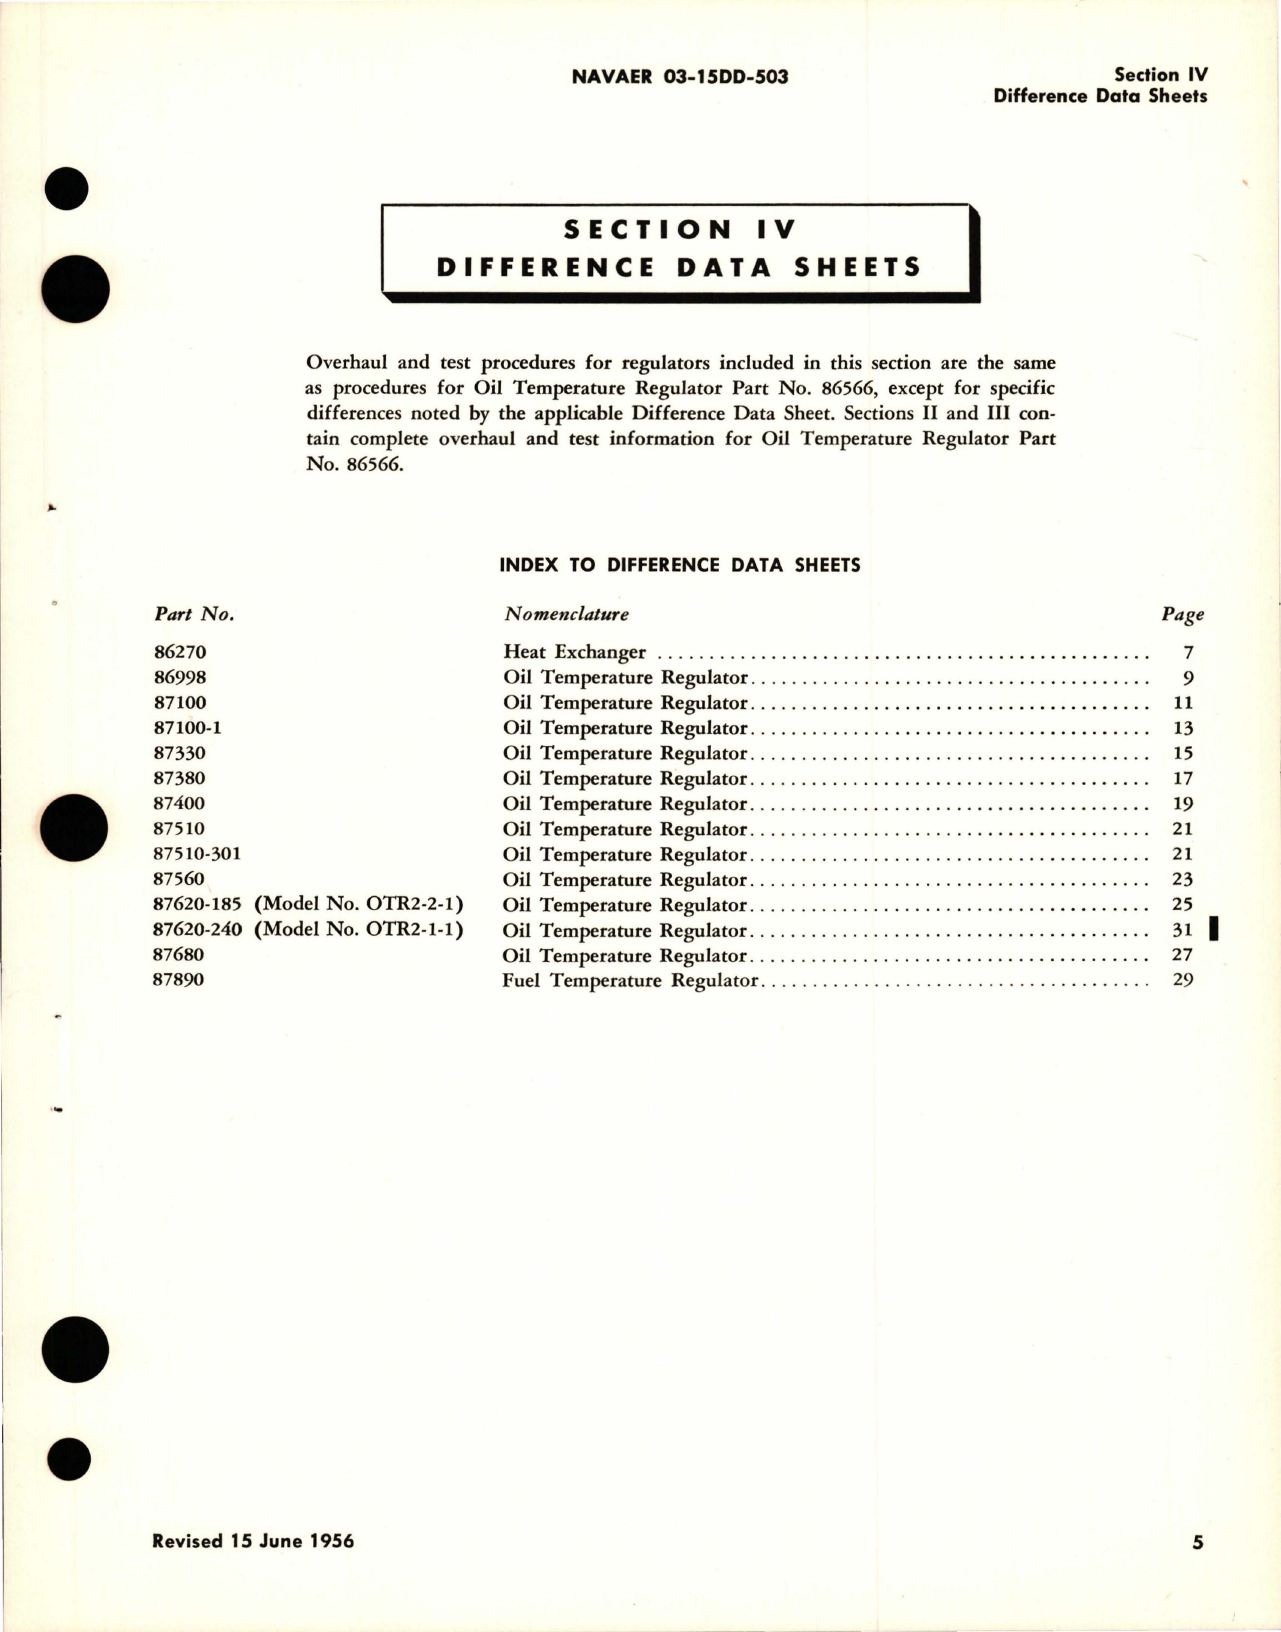 Sample page 7 from AirCorps Library document: Overhaul Instructions for Oil Temperature Regulators, Heat Exchanger and Fuel Temp Regulator